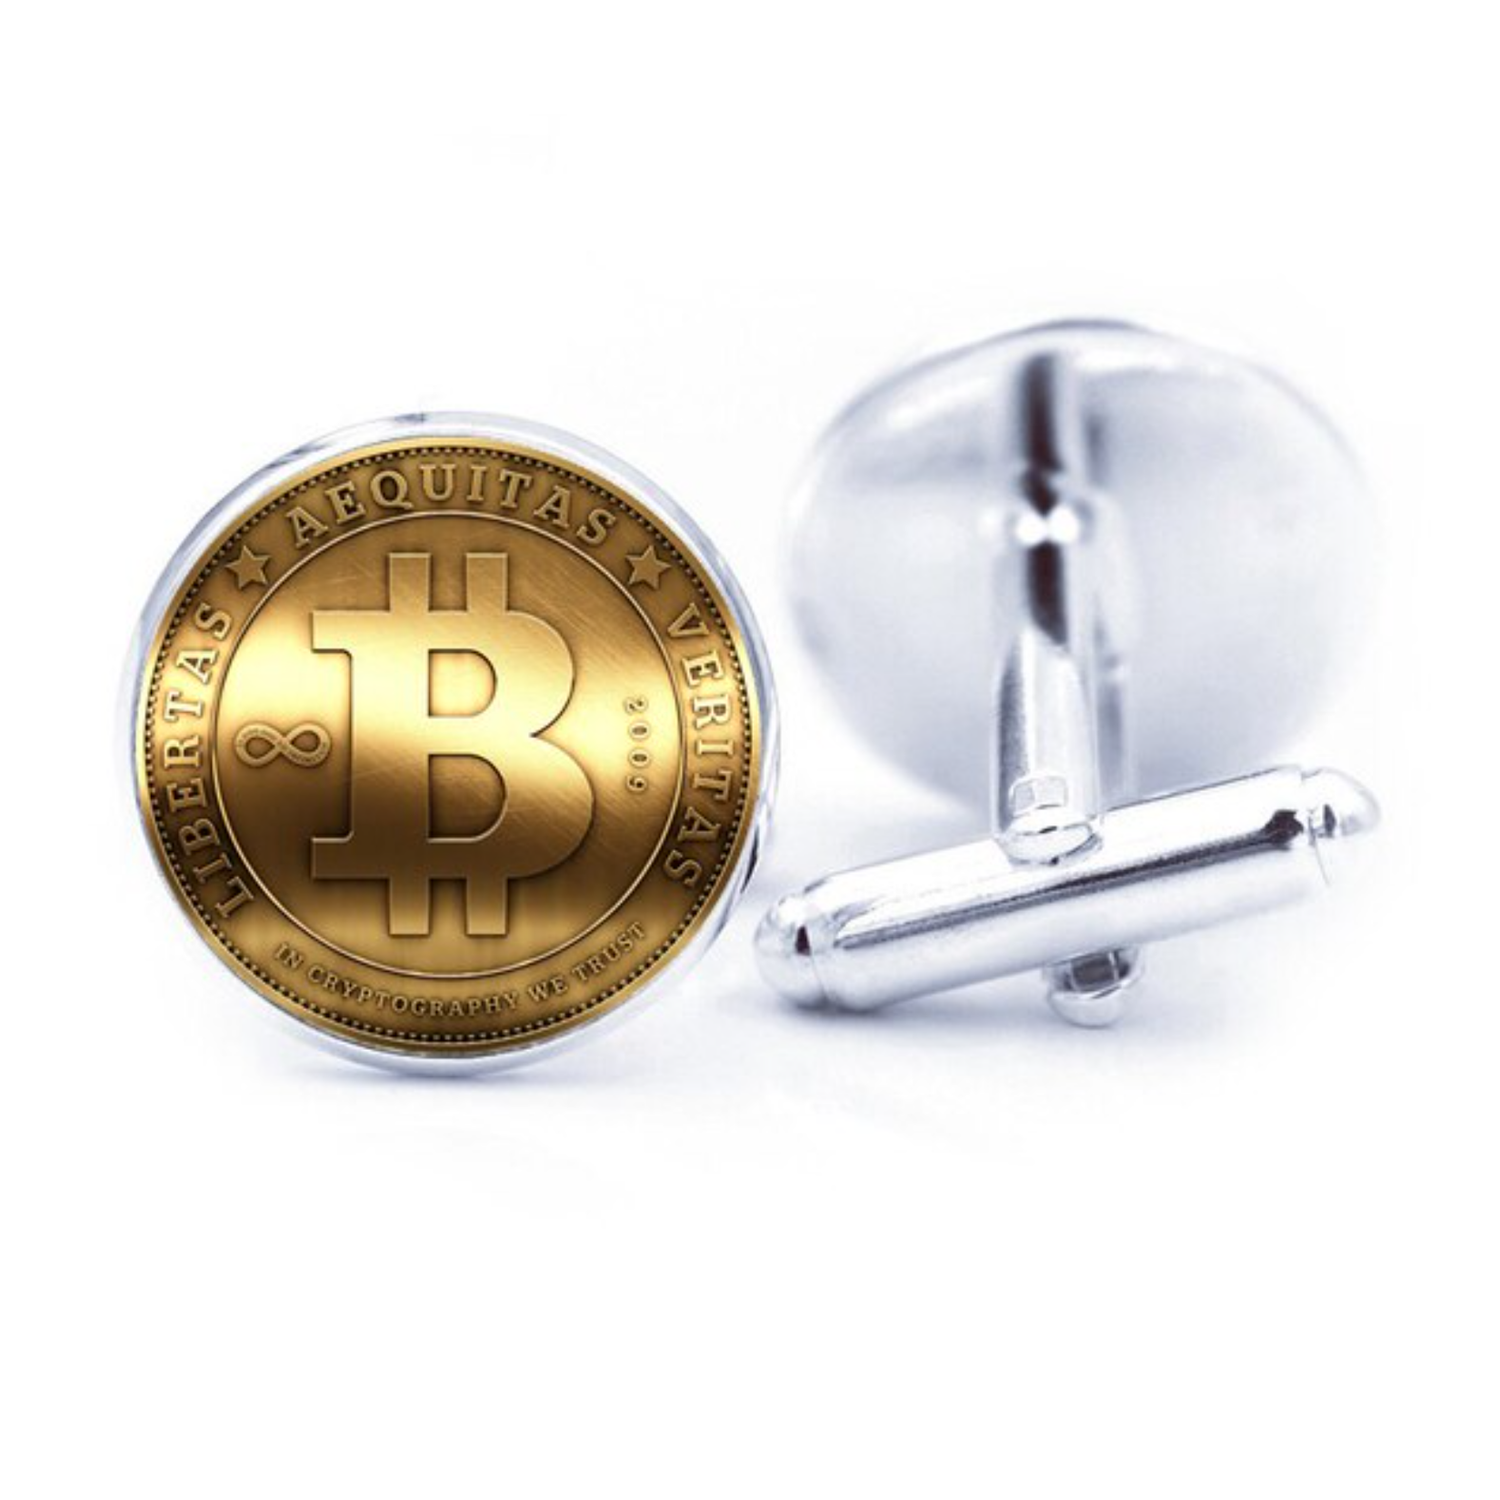 Chrome and Gold Colored Bitcoin Cufflinks